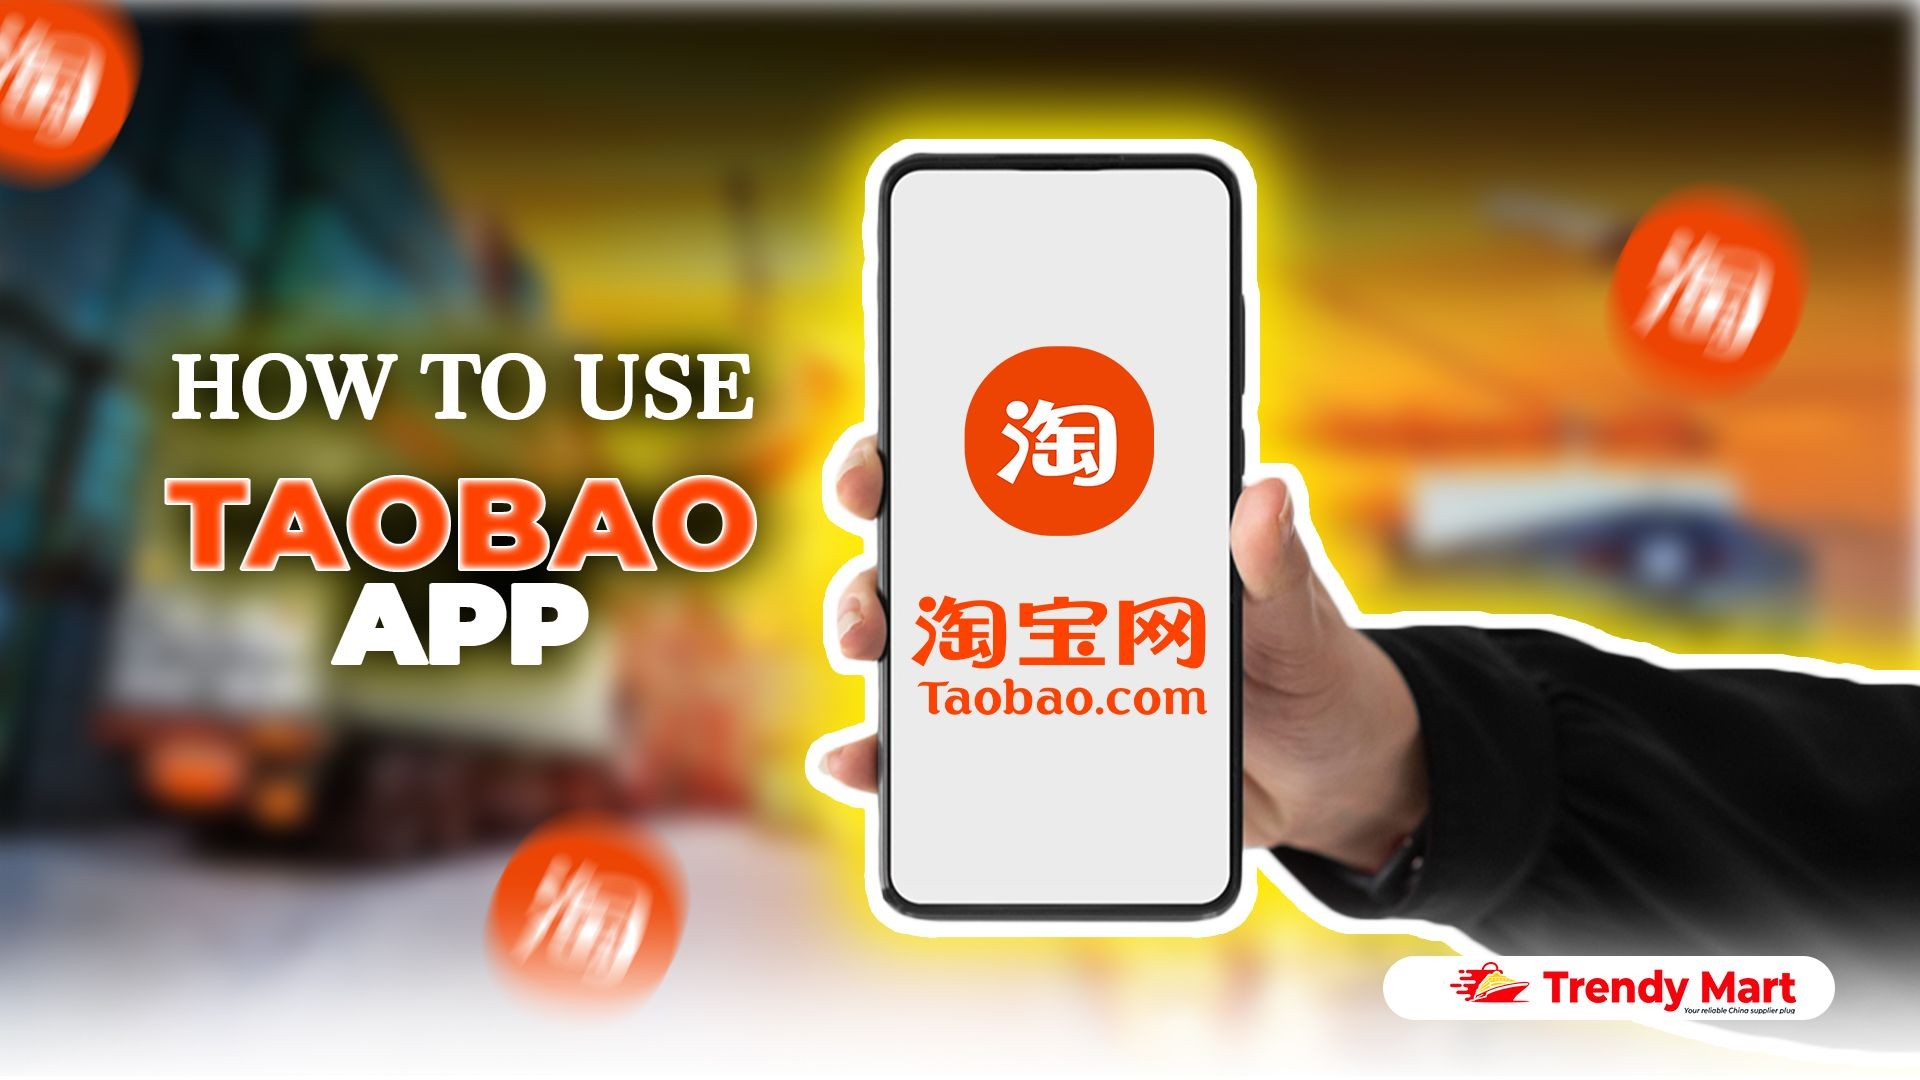 How to use Taobao App